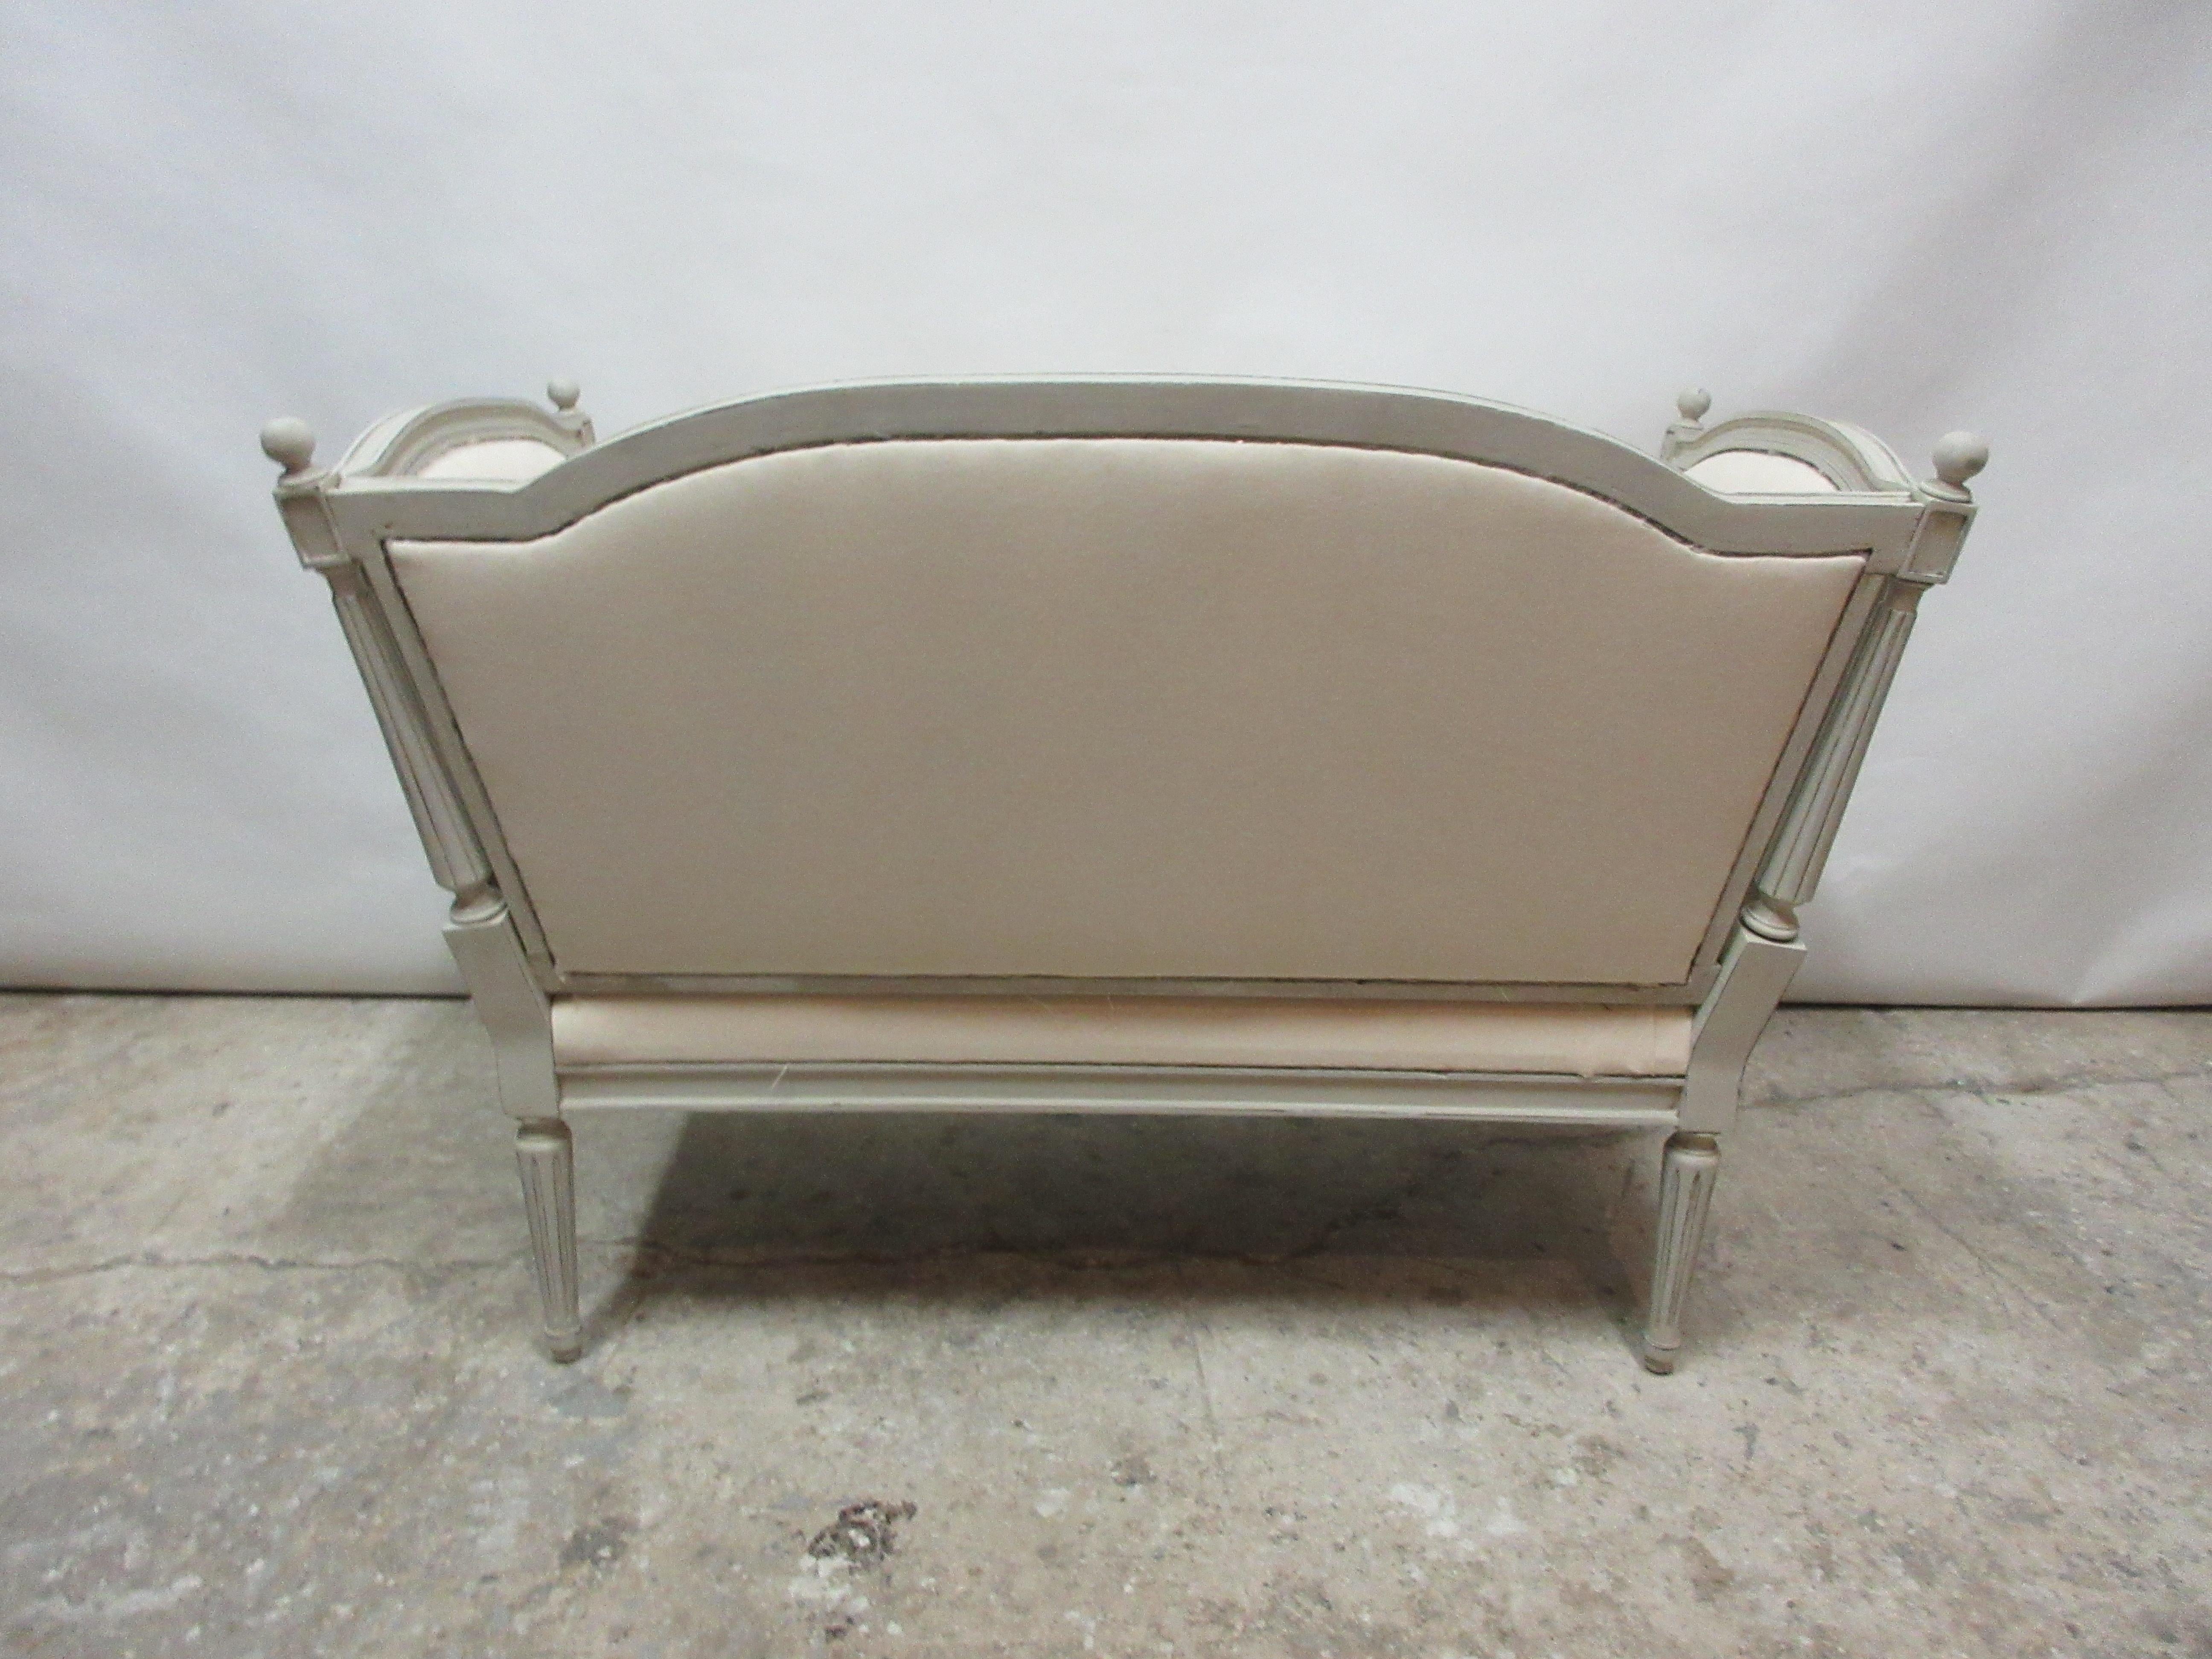 This is a Swedish Gustavian loveseat sofa. it has been restored and repainted with milk paints 